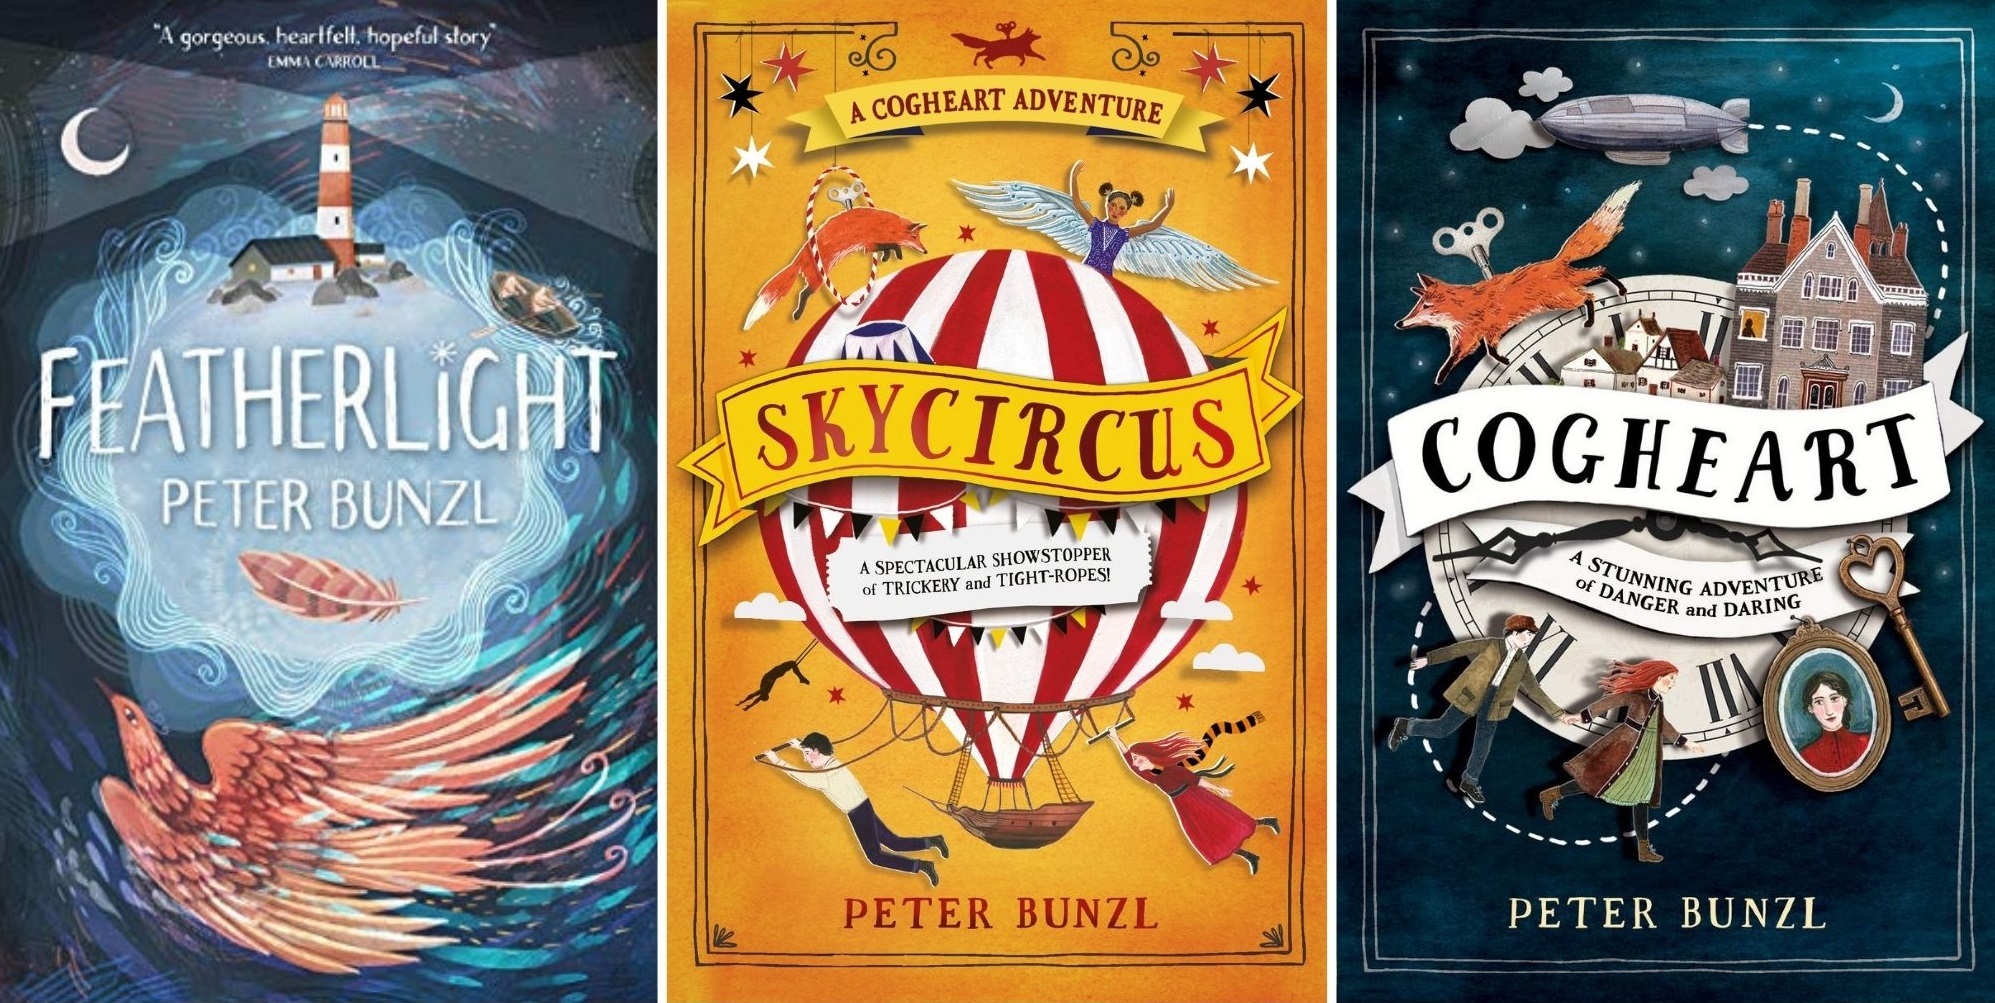 Titles by childrens author Peter Bunzl.